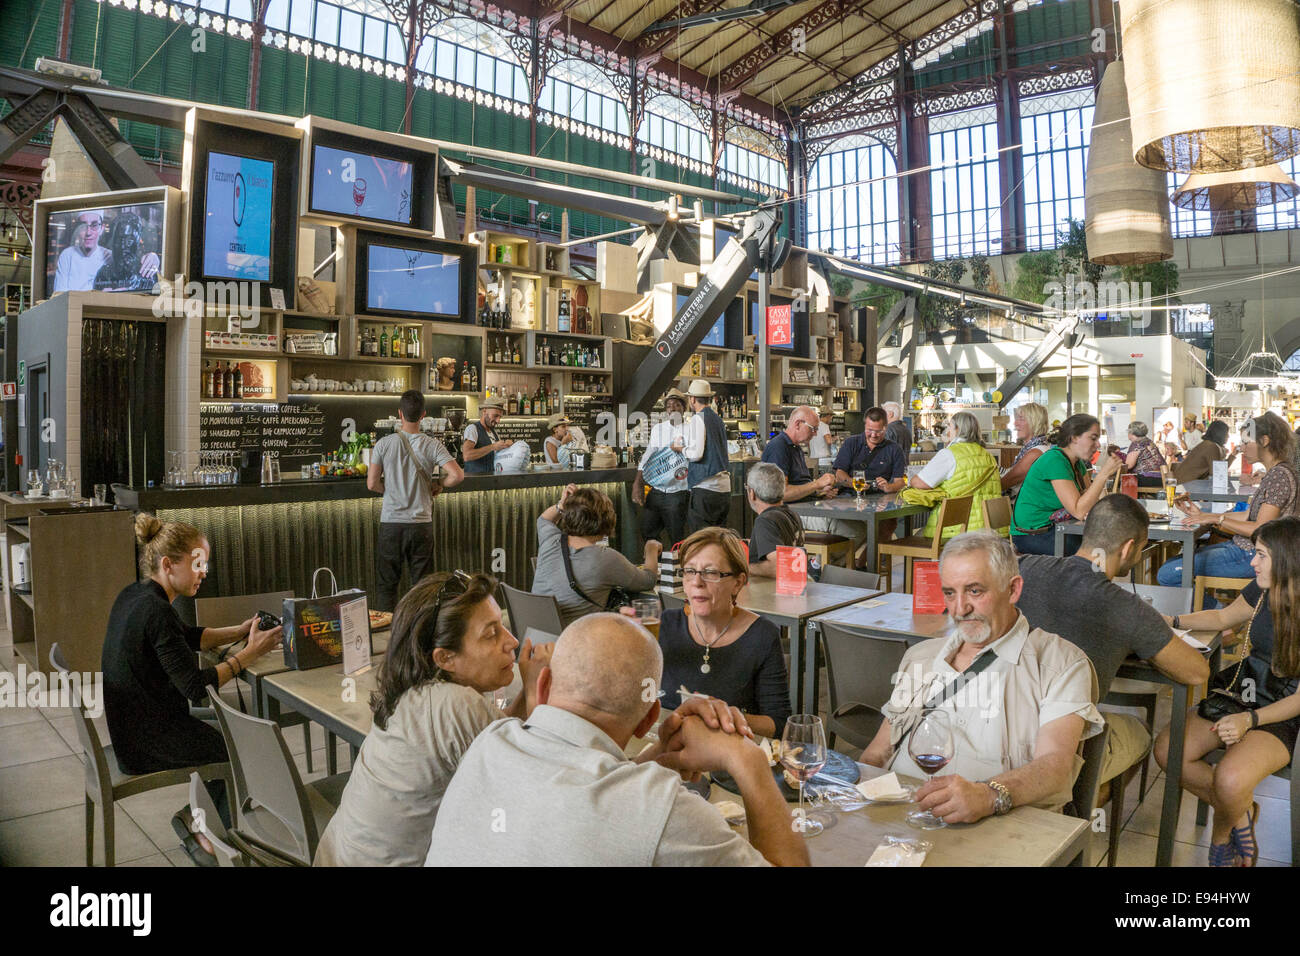 bar & crowded seating area of food court on upper floor inside magnificent Victorian cast iron structure Central Market Florence Stock Photo